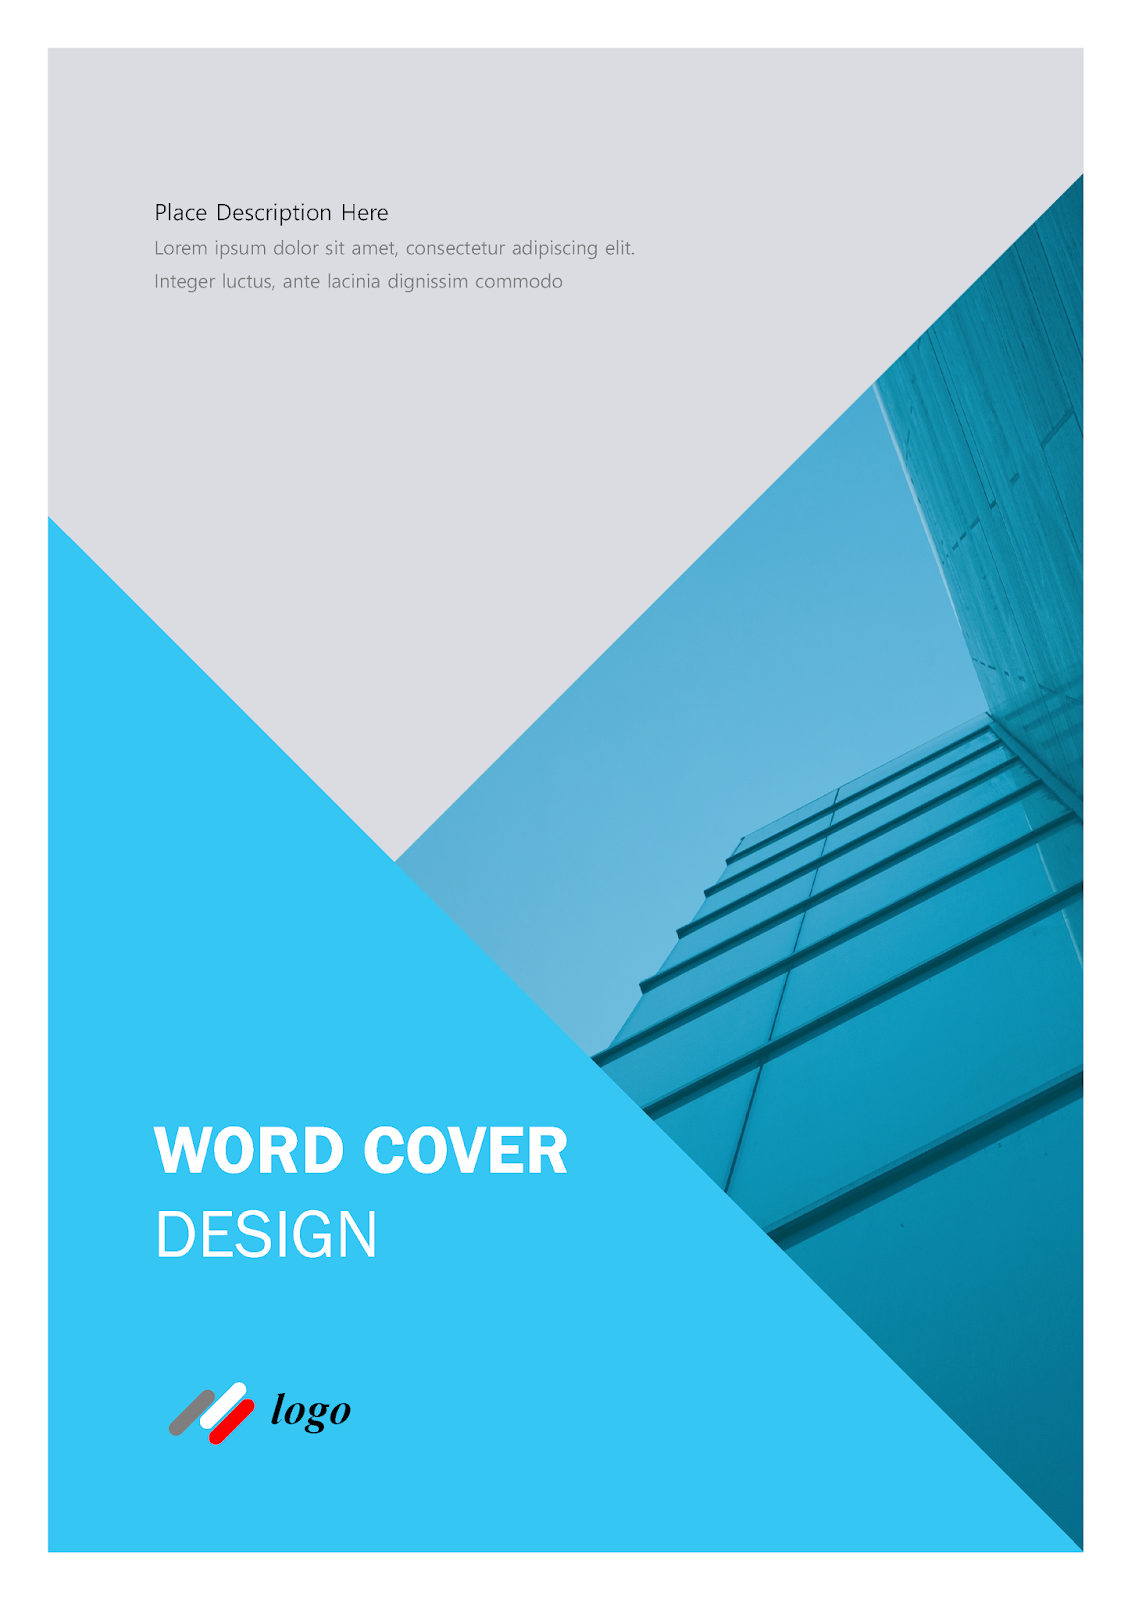 Microsoft Word Cover Page Template Free Download - Ideas of Europedias